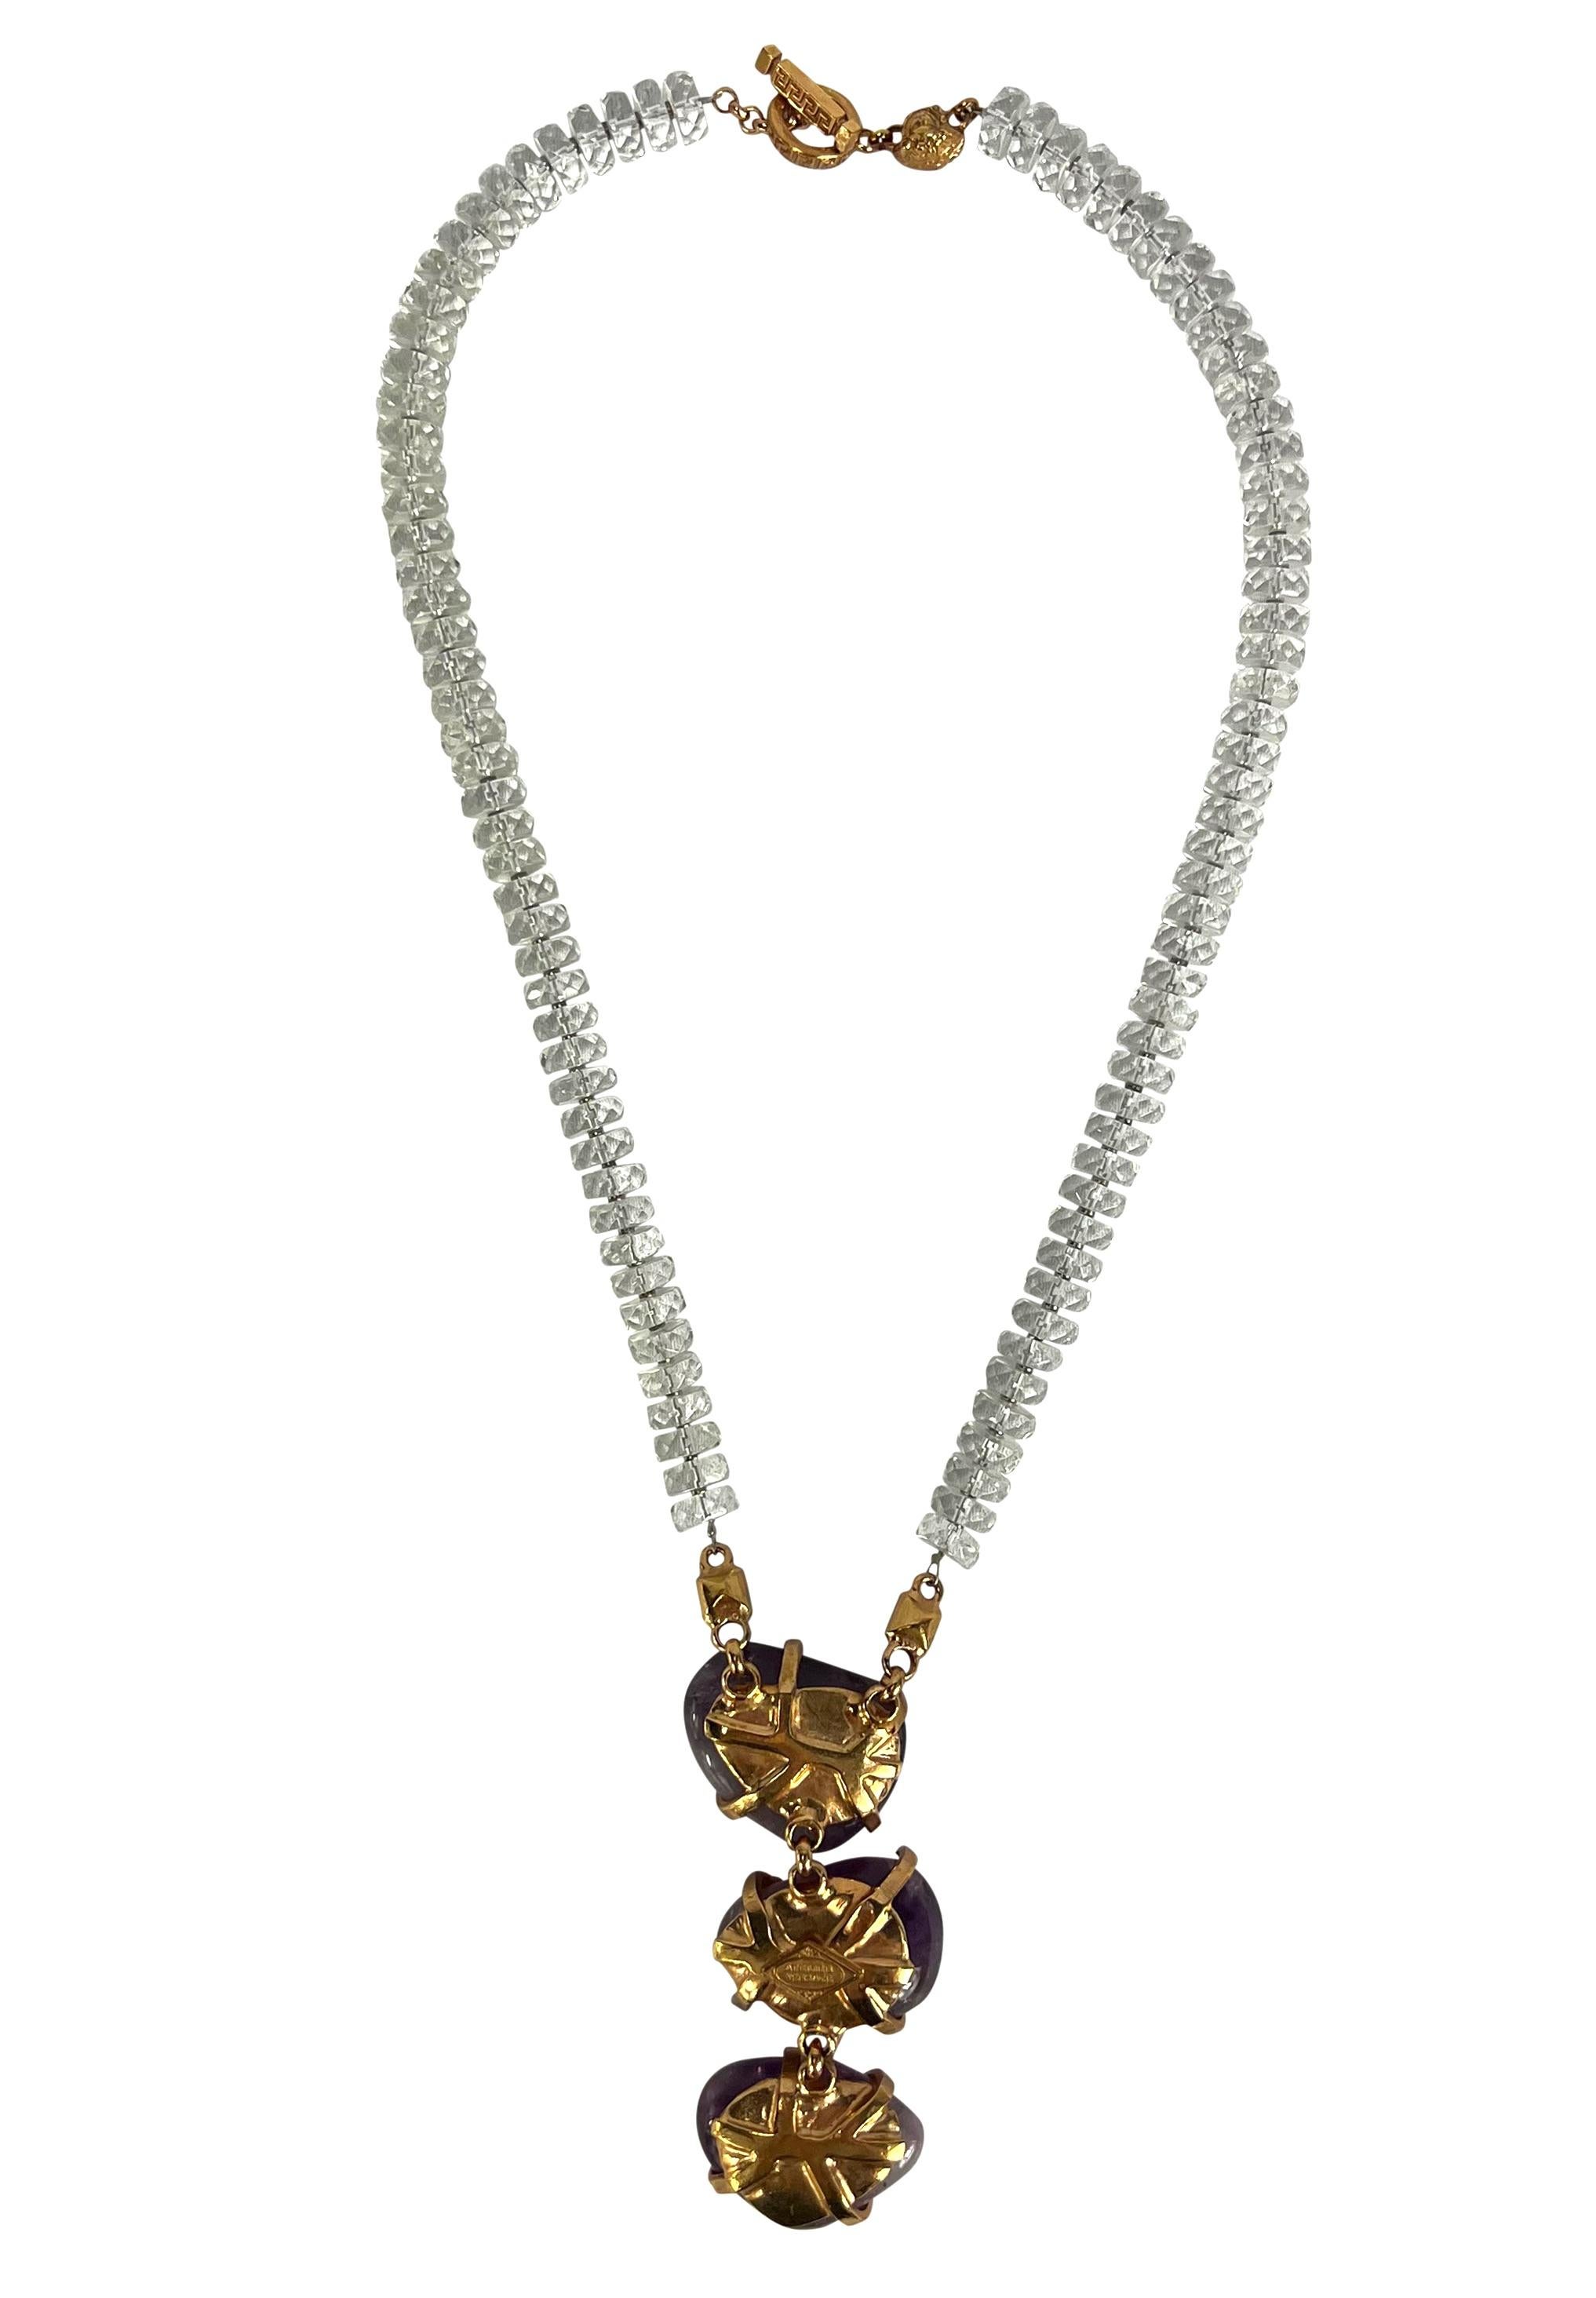 F/W 2000 Atelier Versace Haute Couture Amethyst Crystal Rhinestone Drop Necklace In Excellent Condition For Sale In West Hollywood, CA